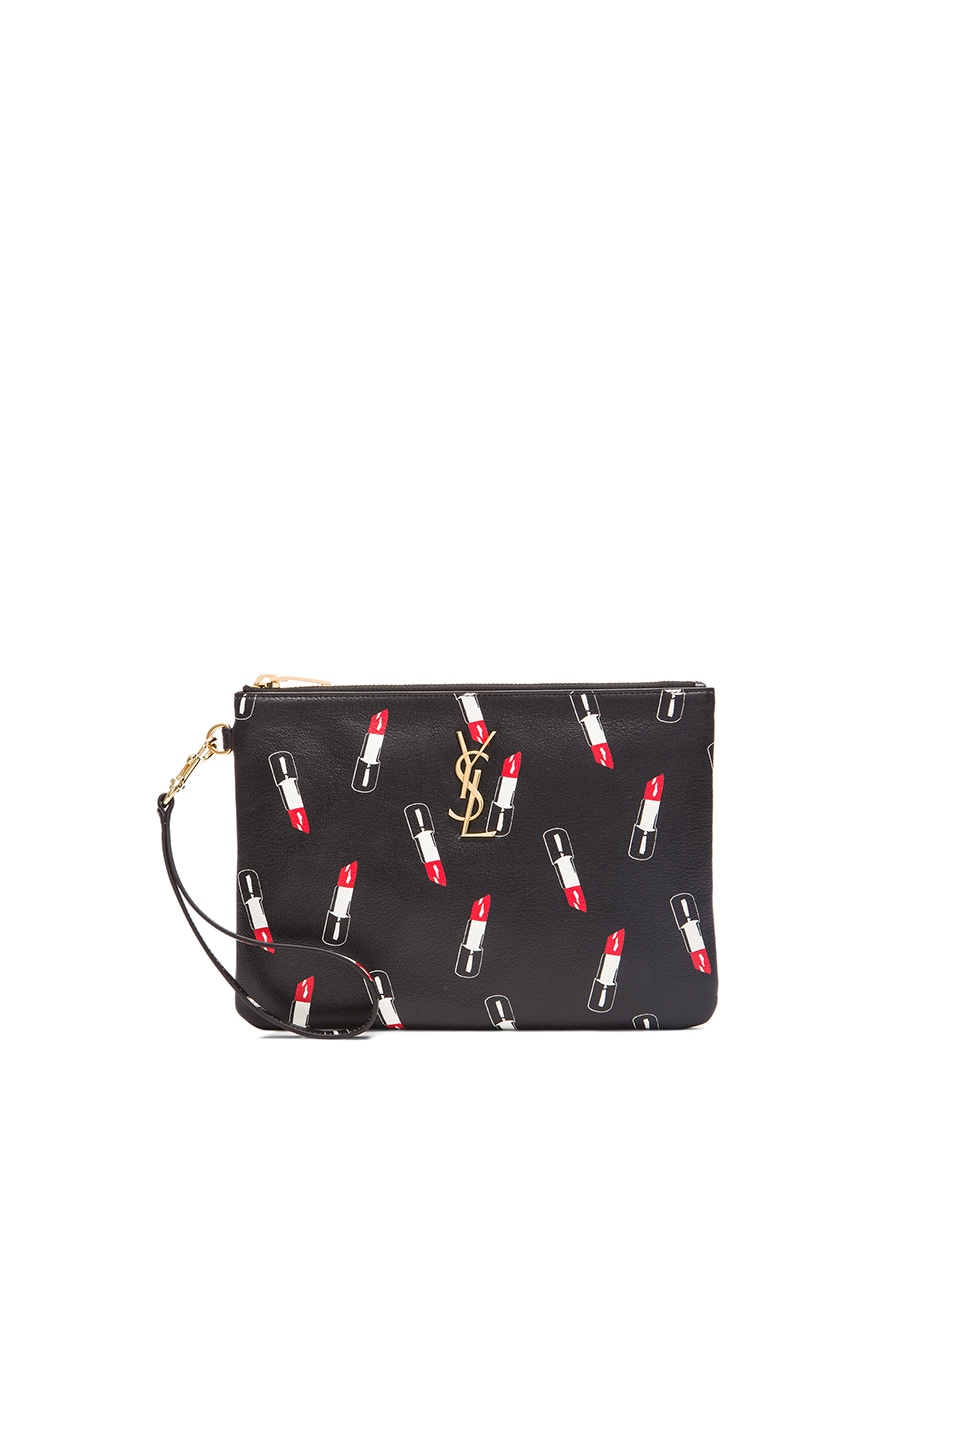 Image 1 of Saint Laurent Lipstick Print Pouch in Black, Red & White